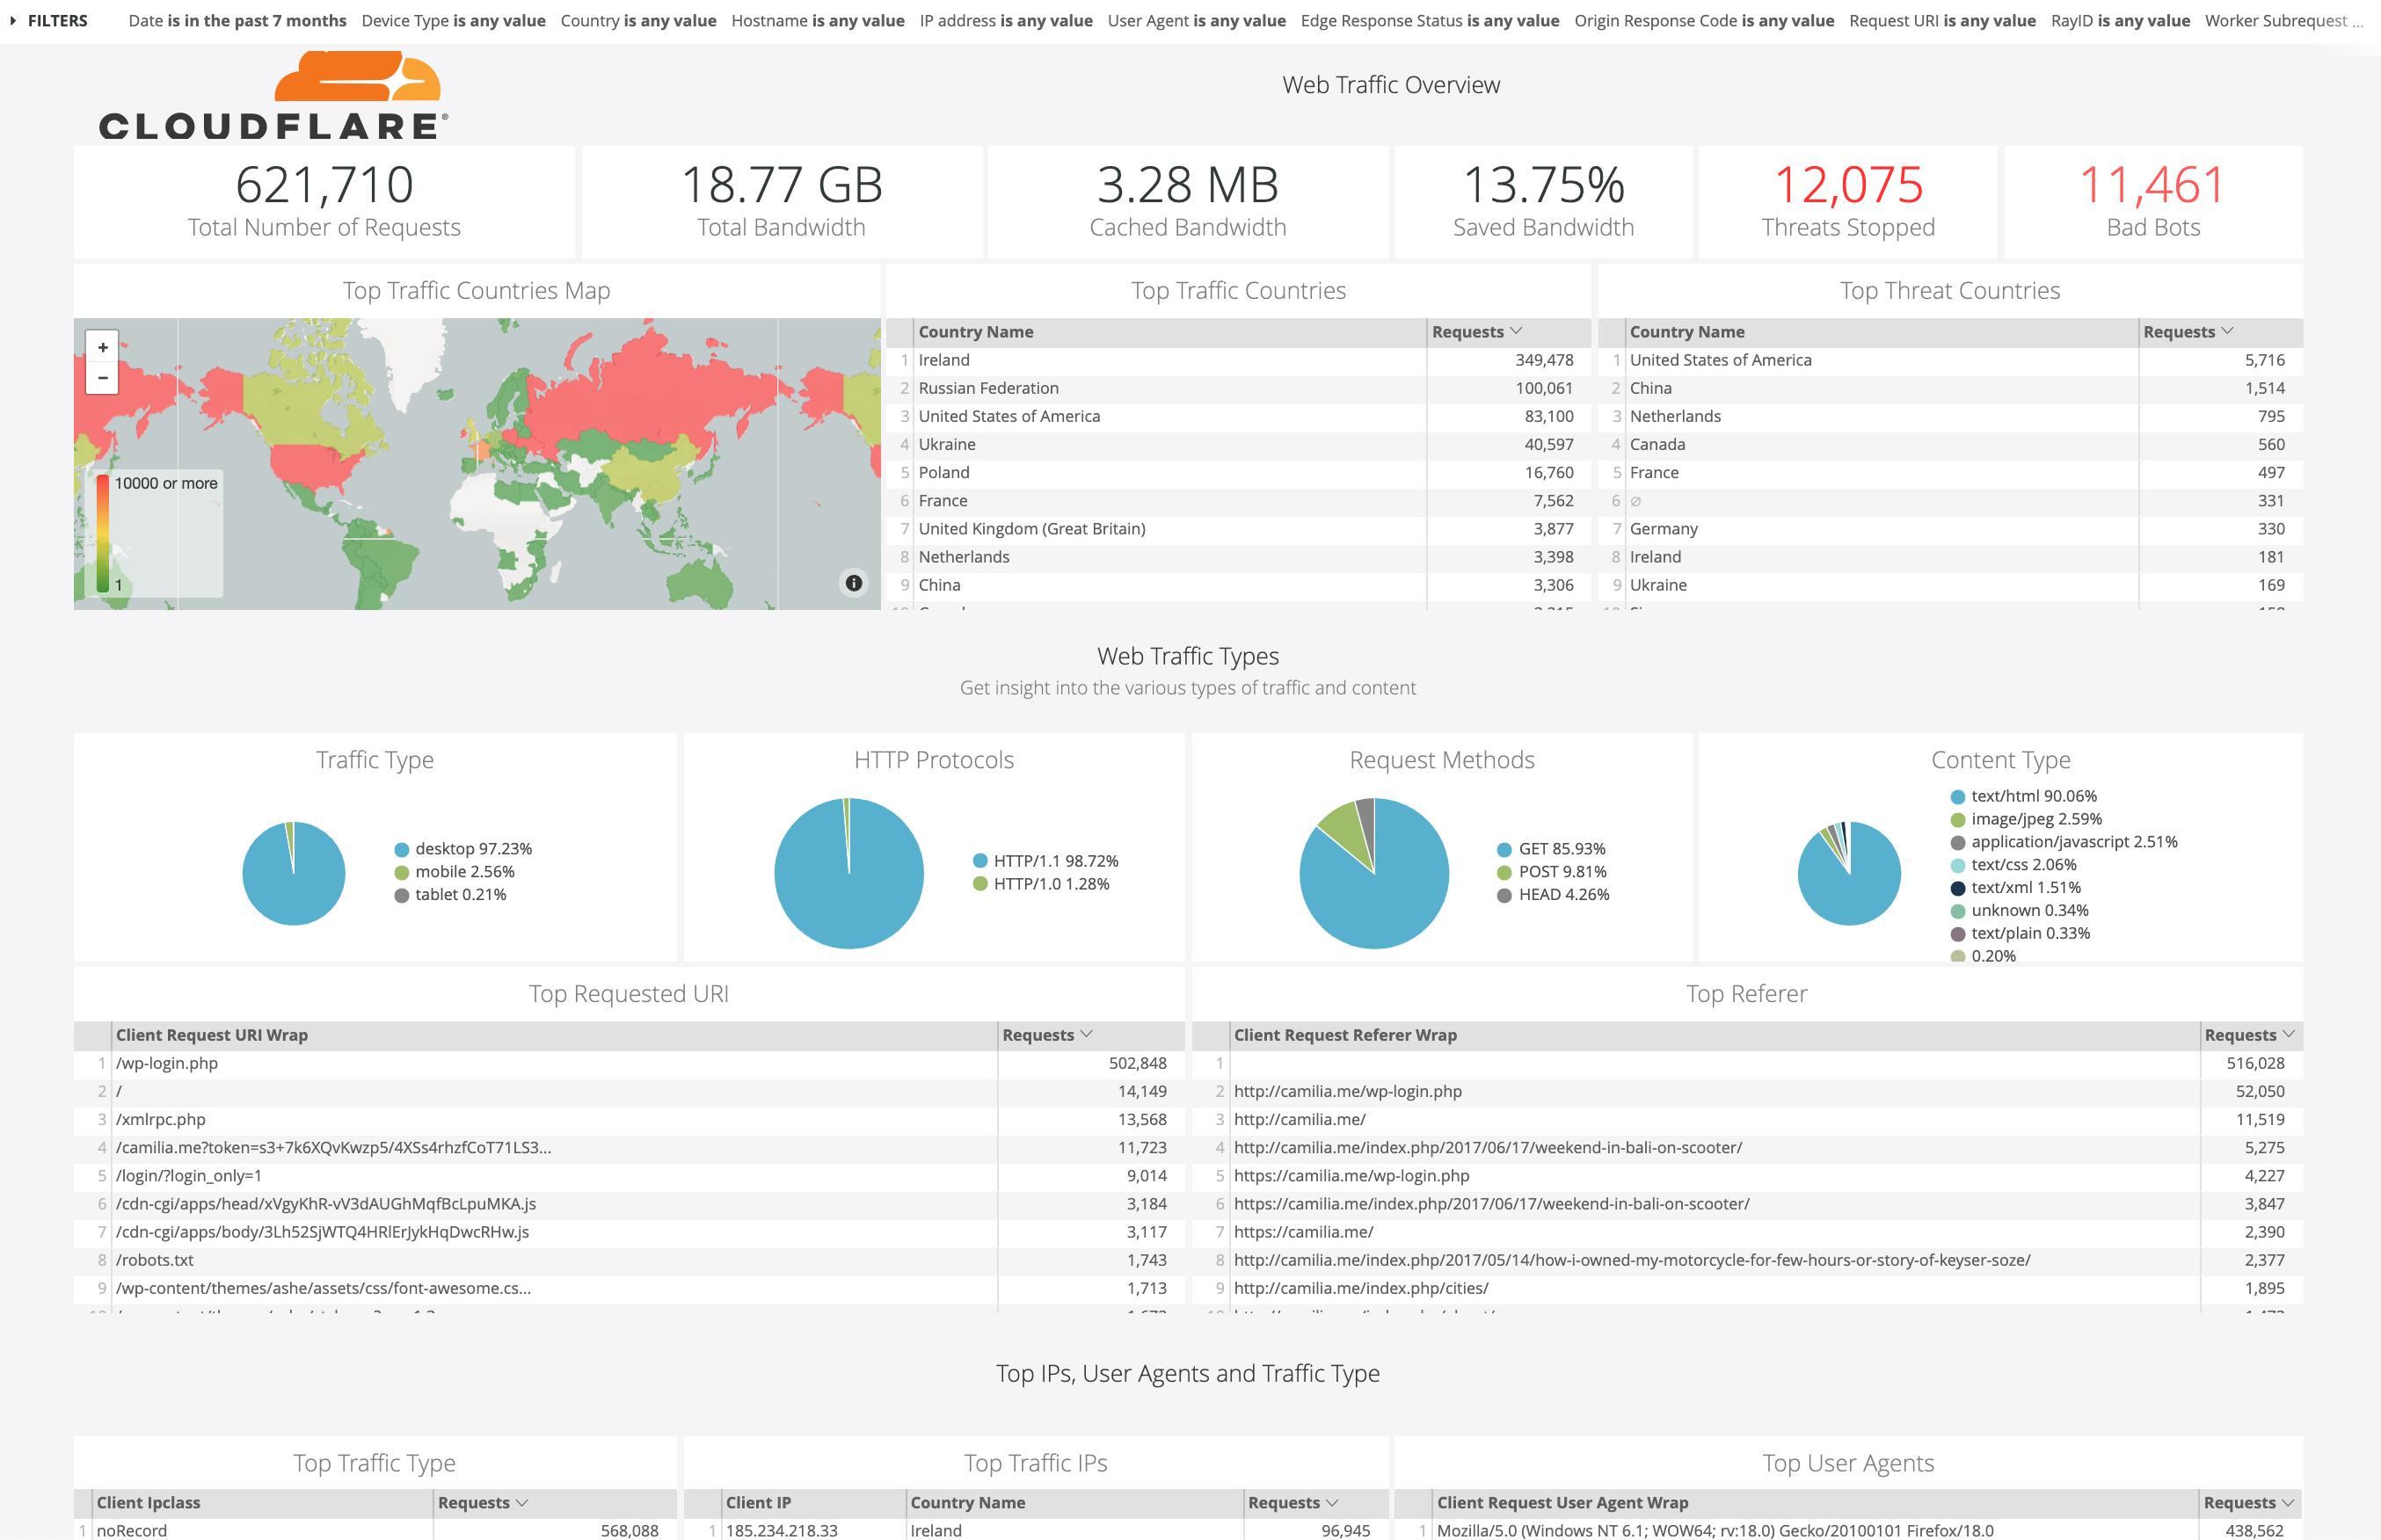 Looker dashboard highlighting Cloudflare metrics including Web Traffic Overview and Web Traffic Types